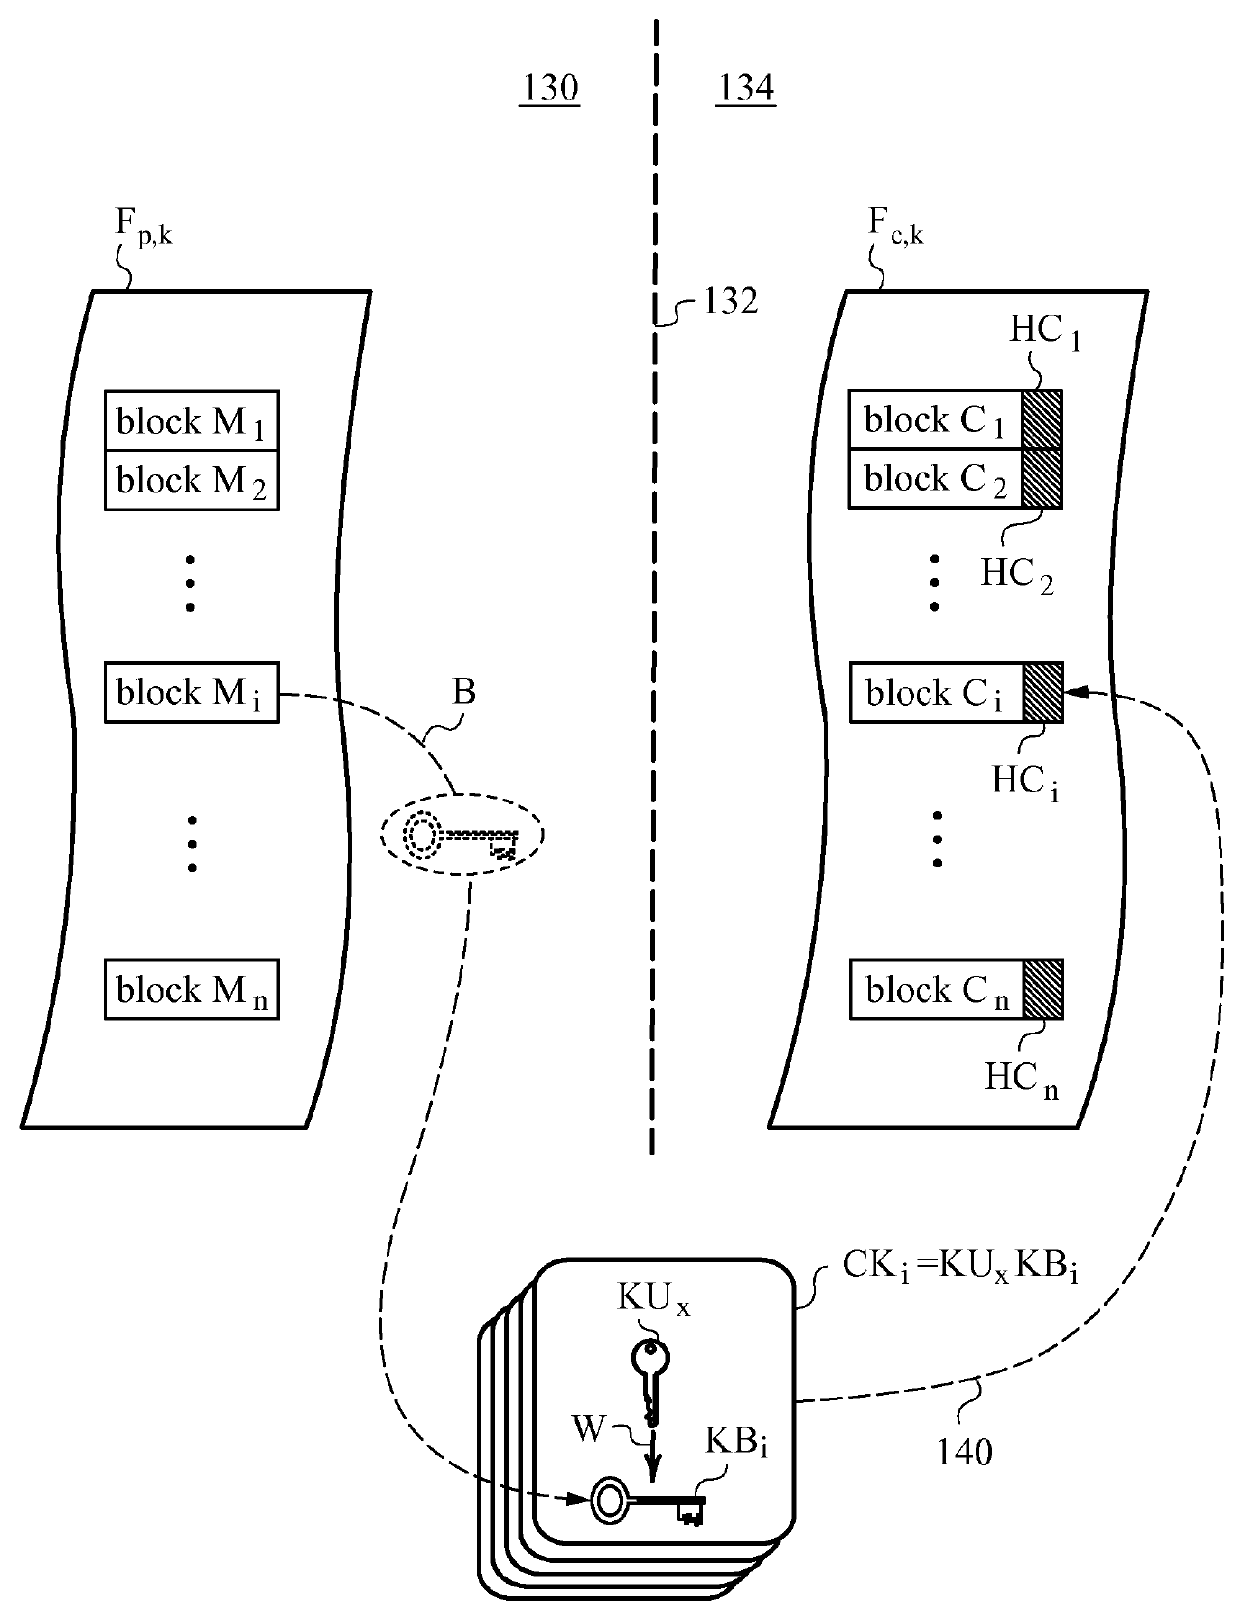 Method of securing files under the semi-trusted user threat model using symmetric keys and per-block key encryption